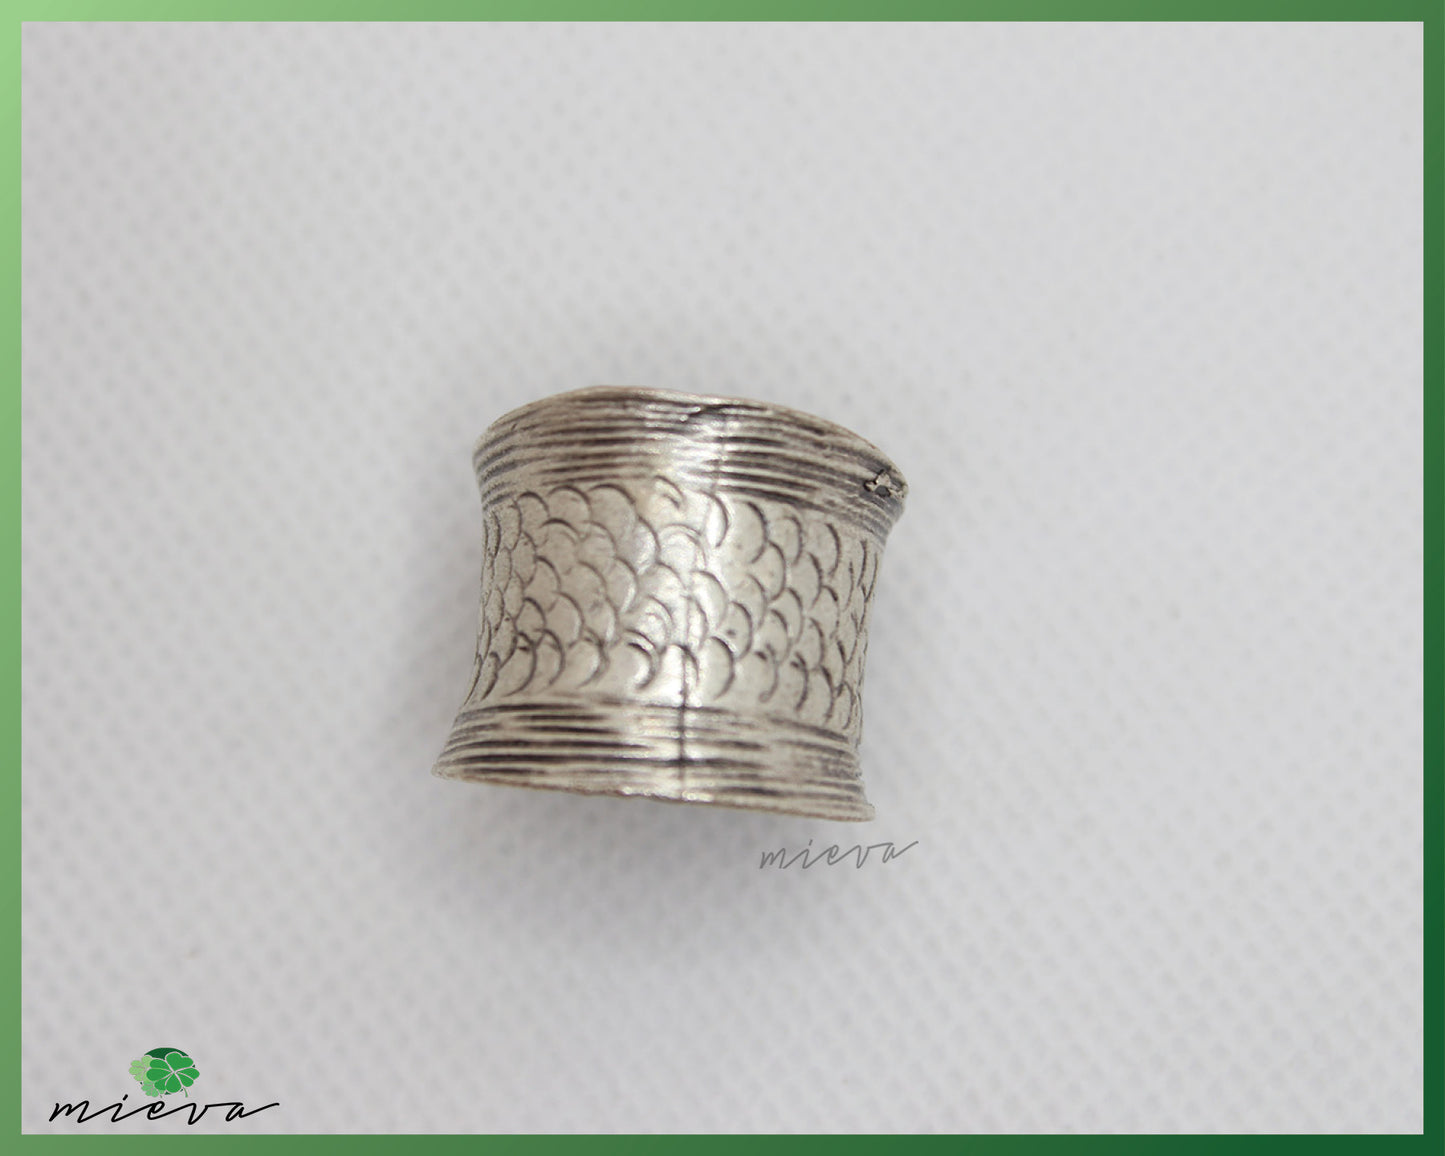 Sculptural Textured Silver Band Ring